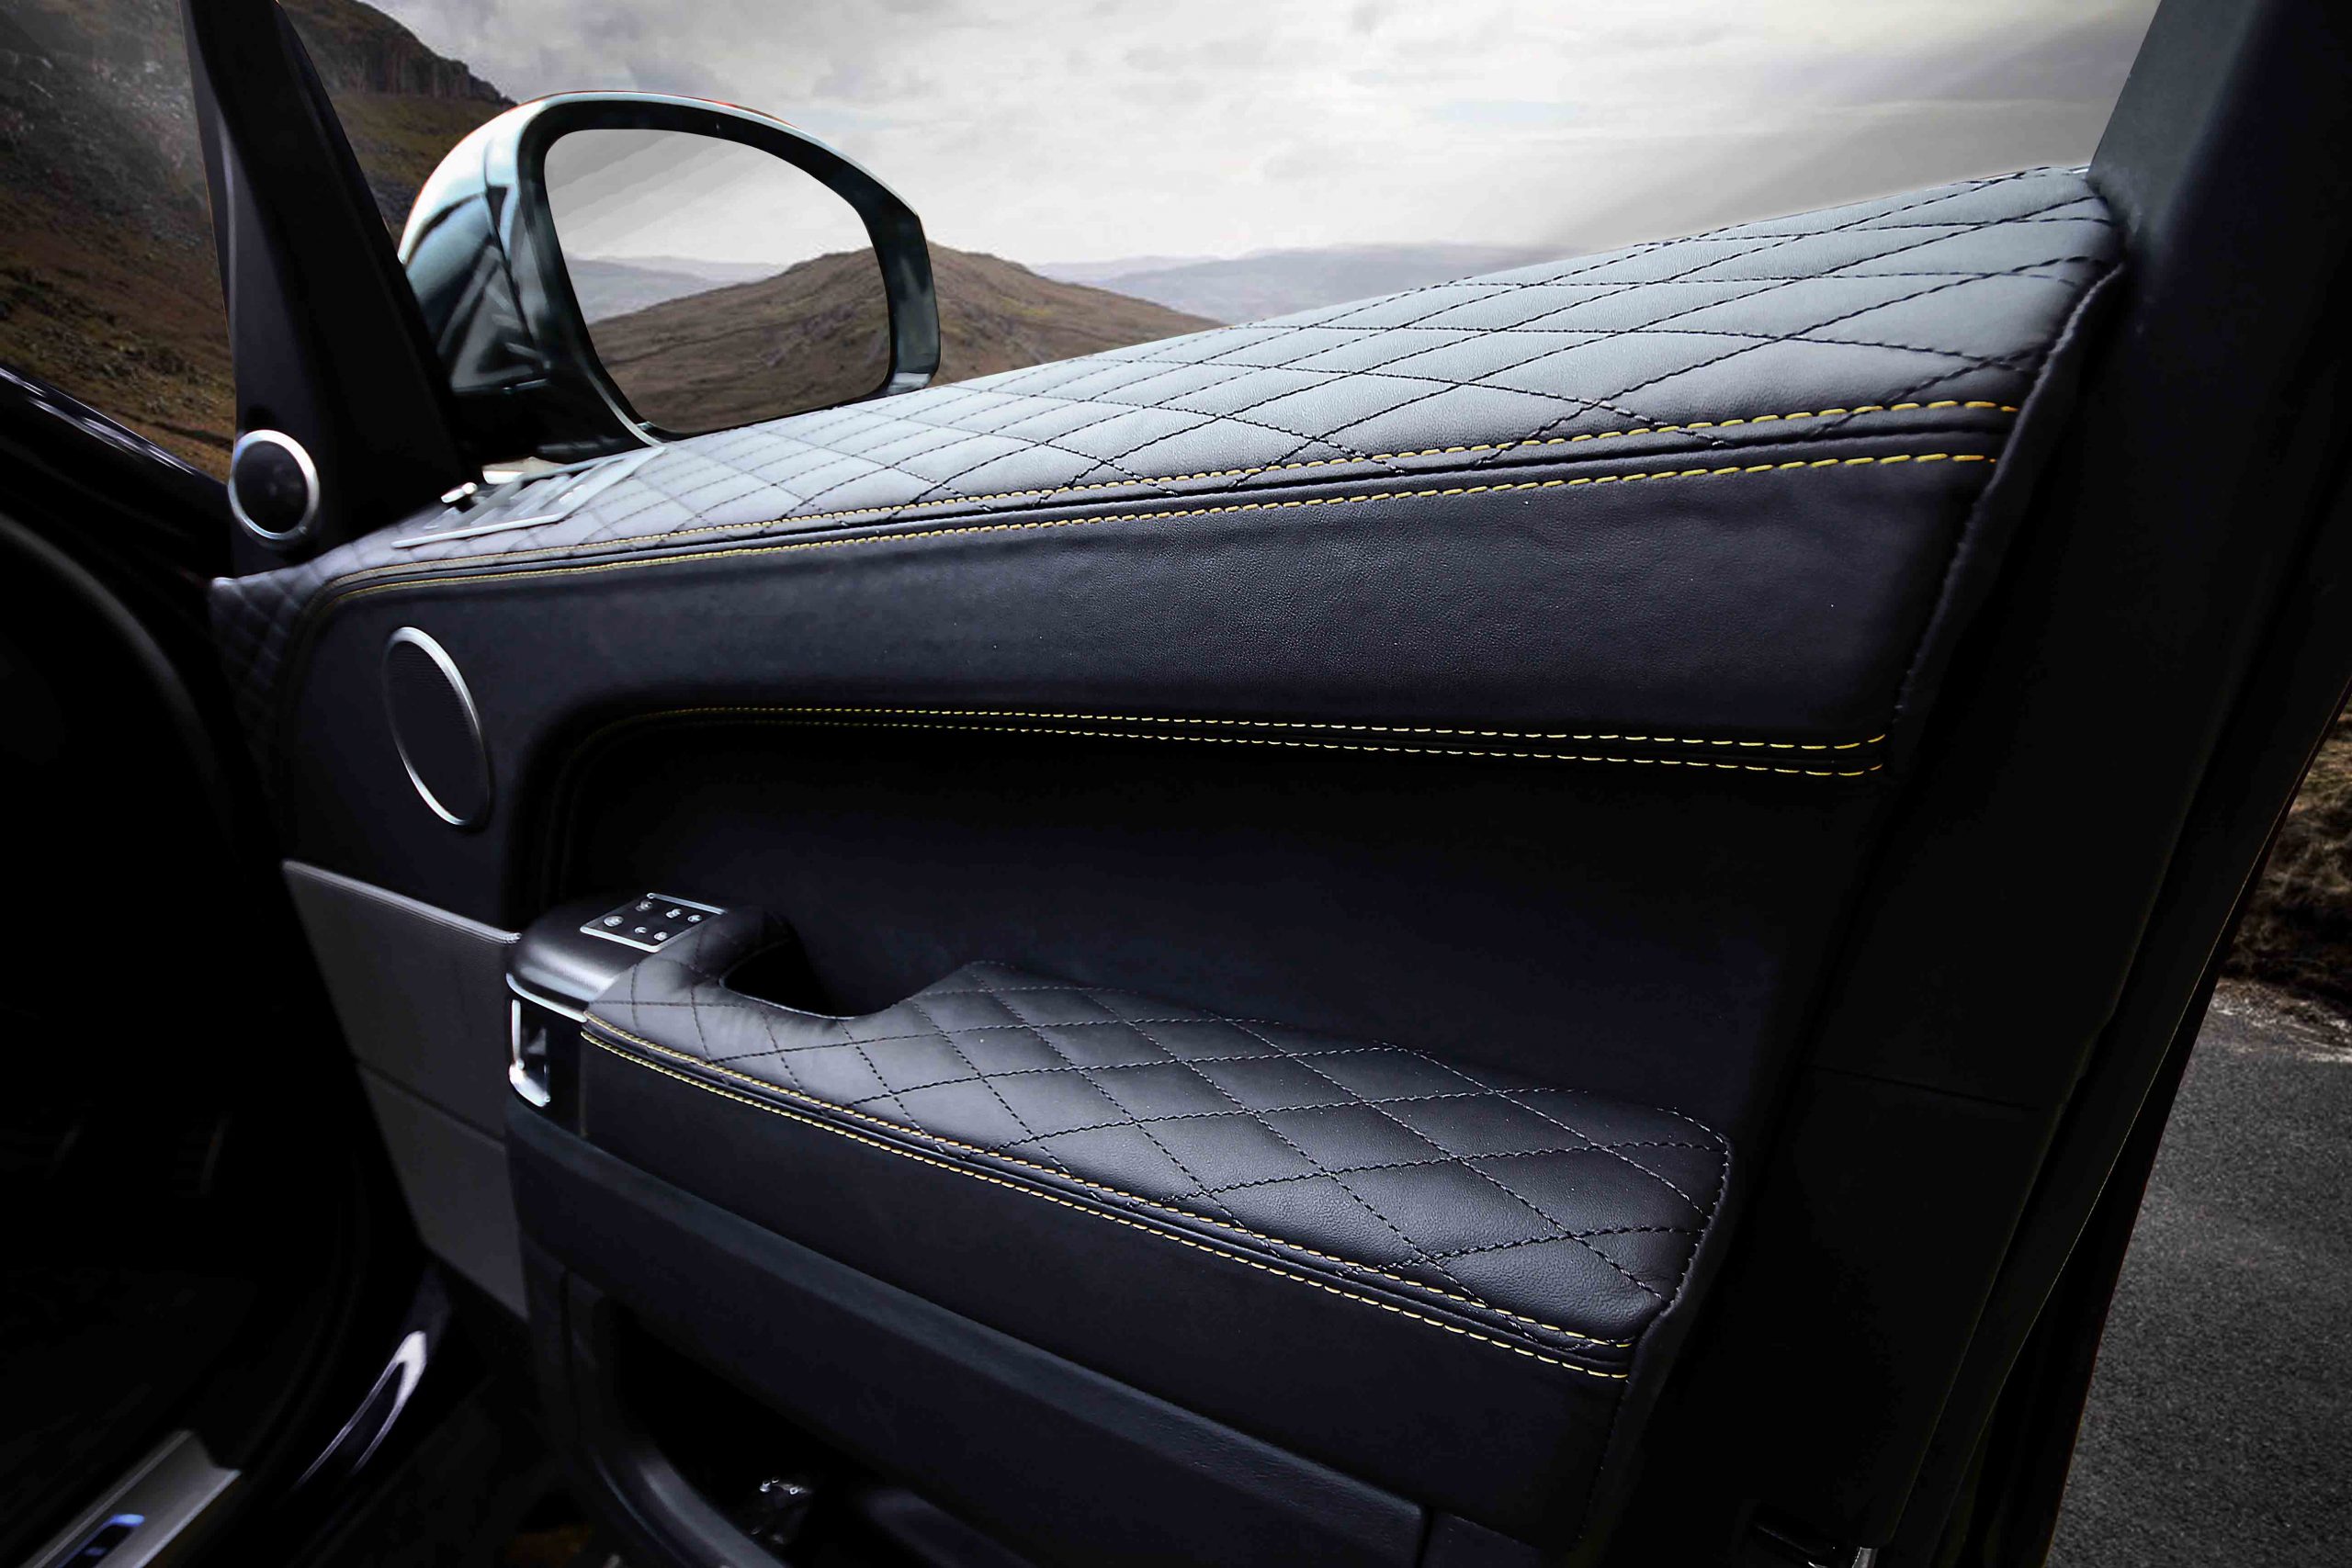 Wildcat xpressions interior for Land Rover Range Rover Vogue (2019+)